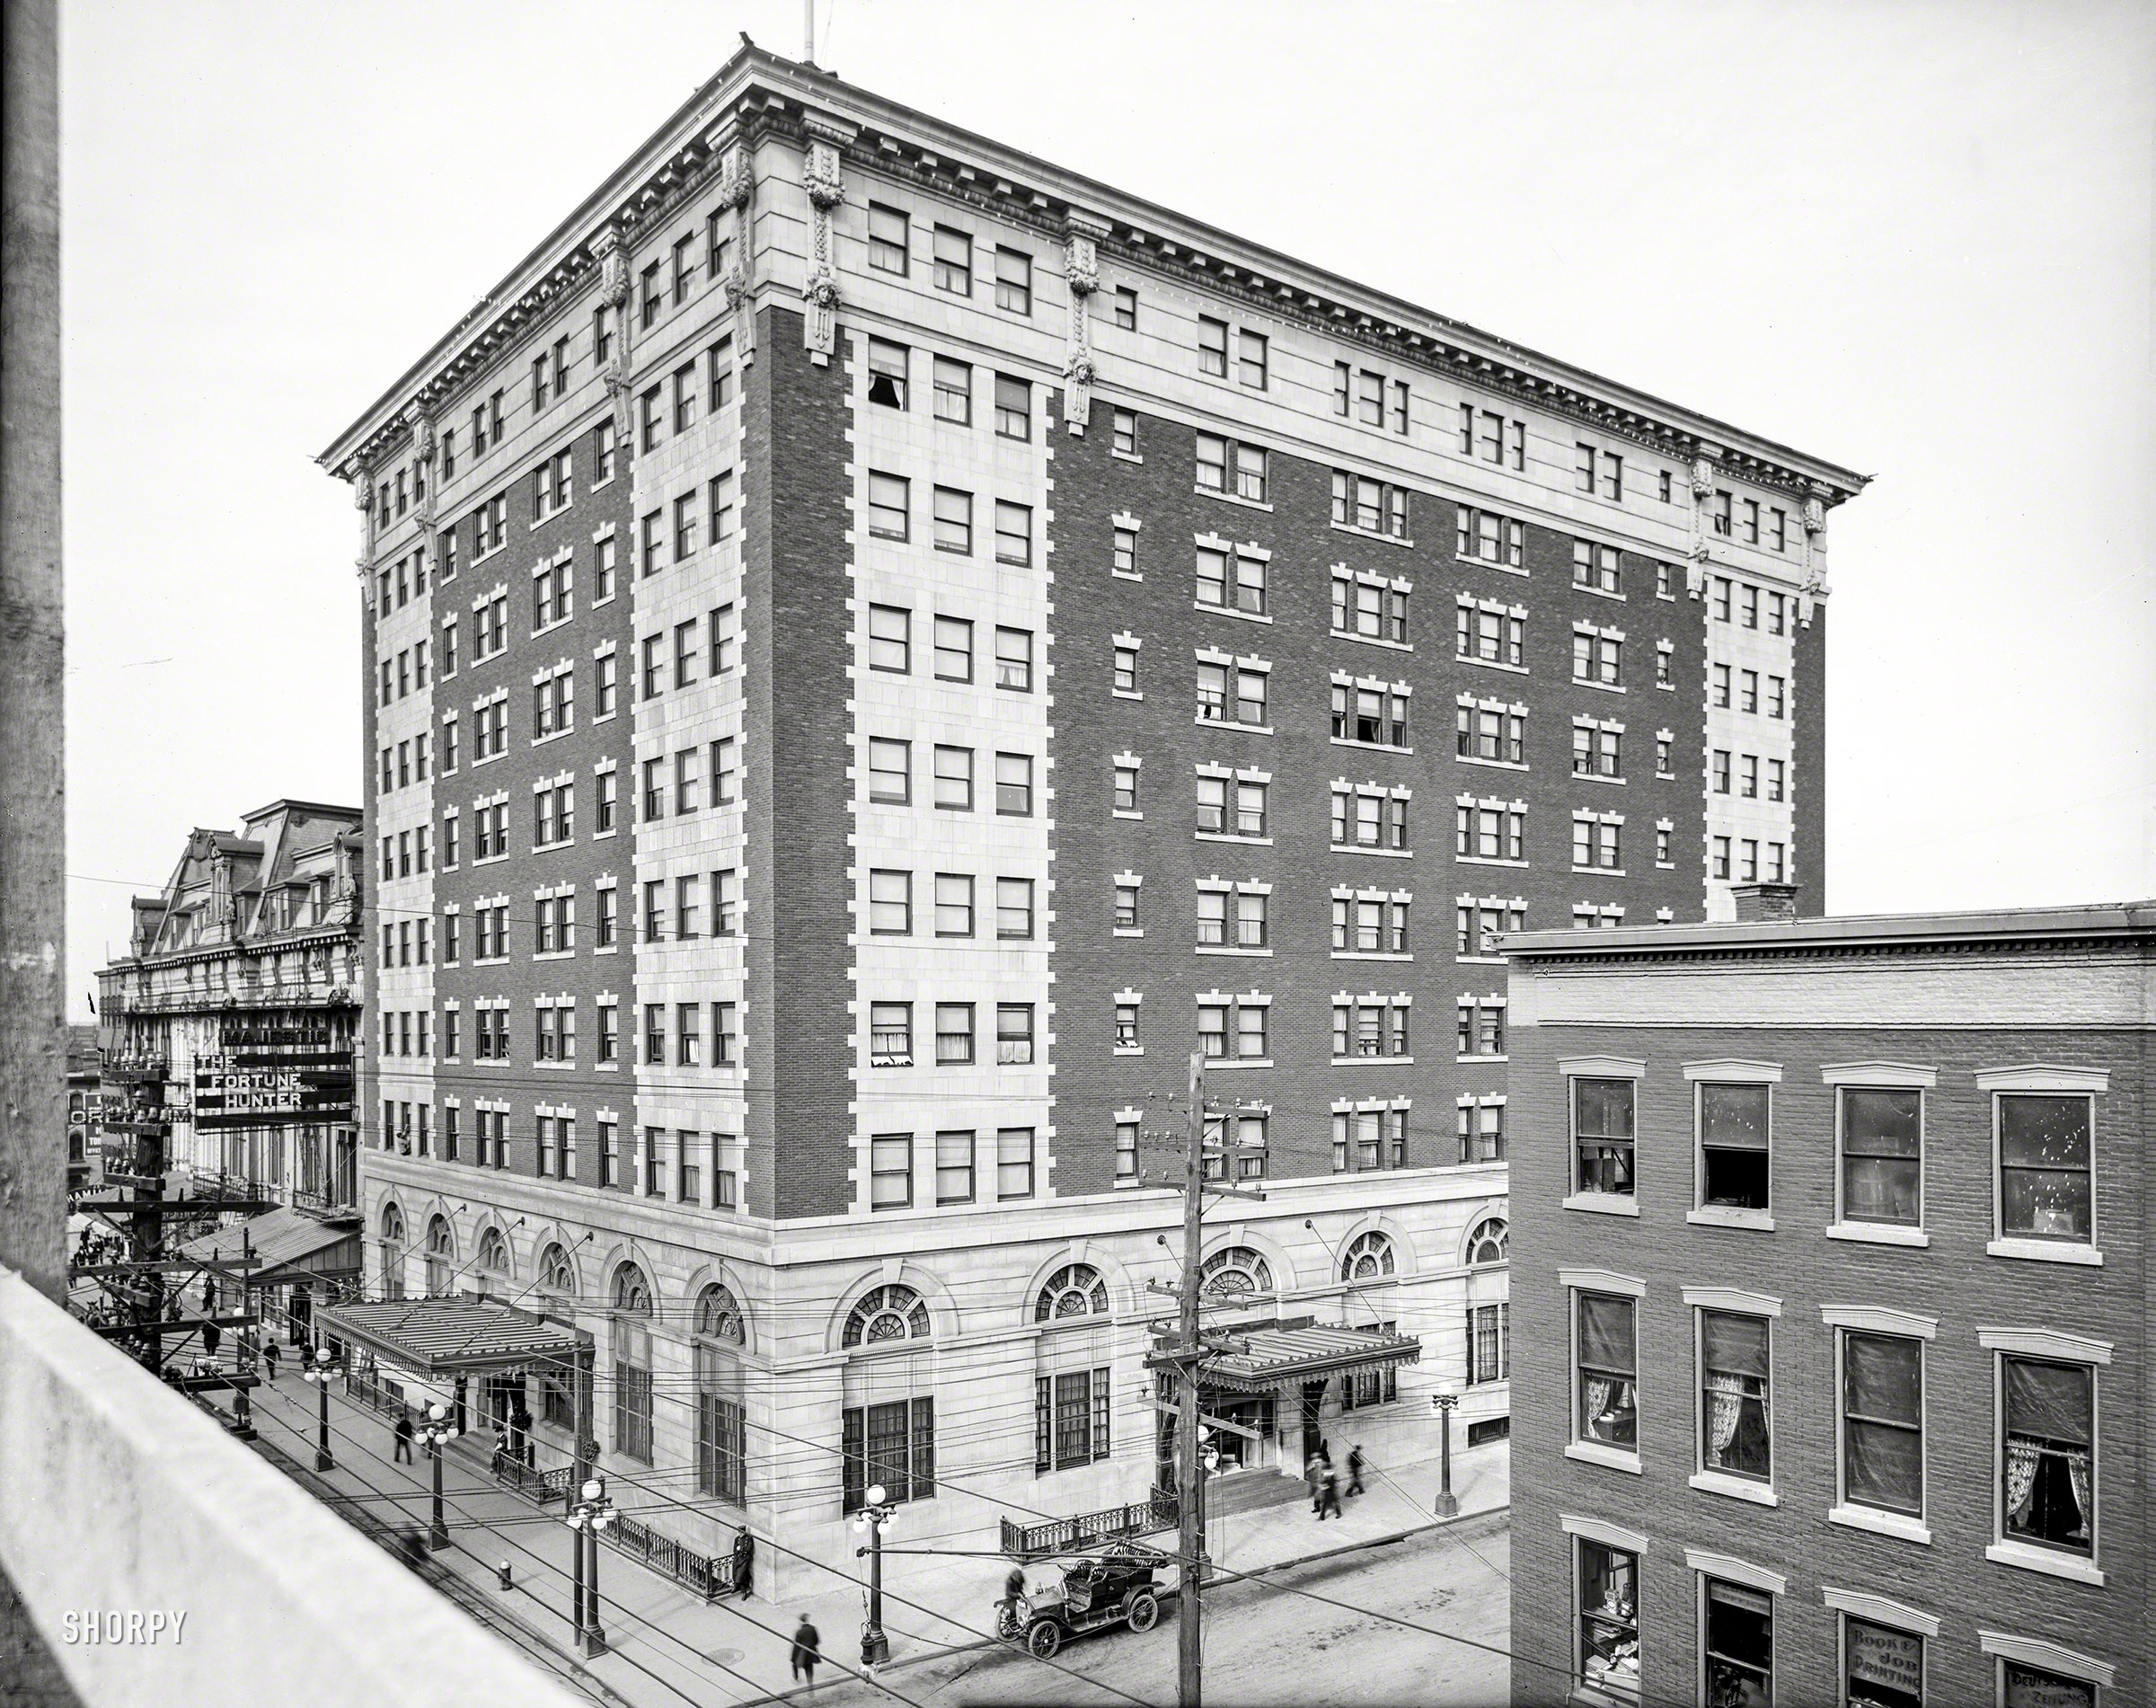 Utica, New York, circa 1910. "Hotel Utica." Playing next door at the Majestic: "The Fortune Hunter." 8x10 inch dry plate glass negative. View full size.